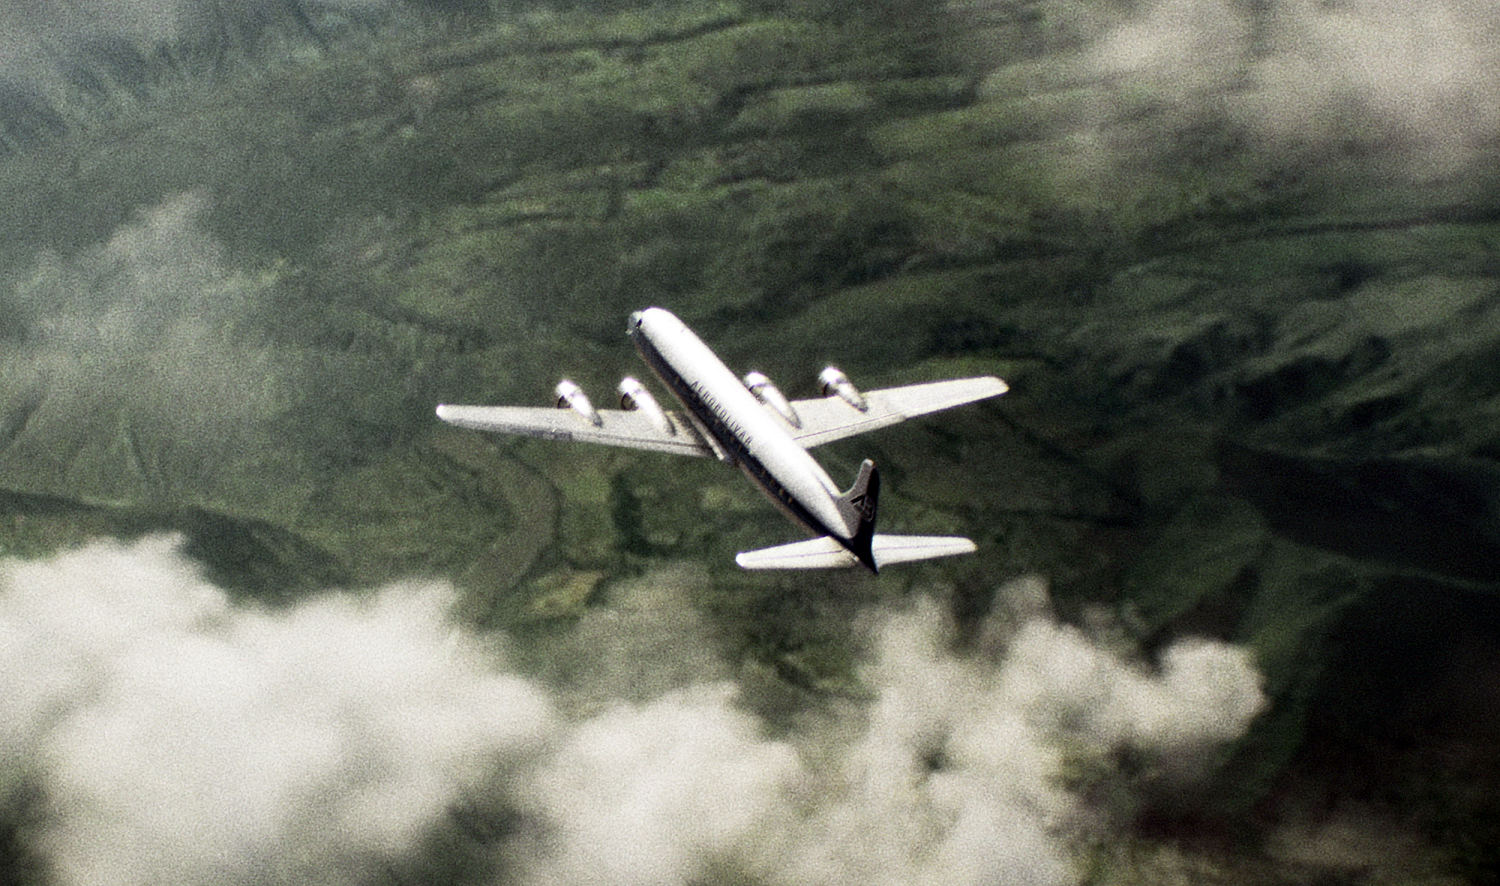 The true story behind the new Netflix series ‘The Hijacking of
Flight 601’